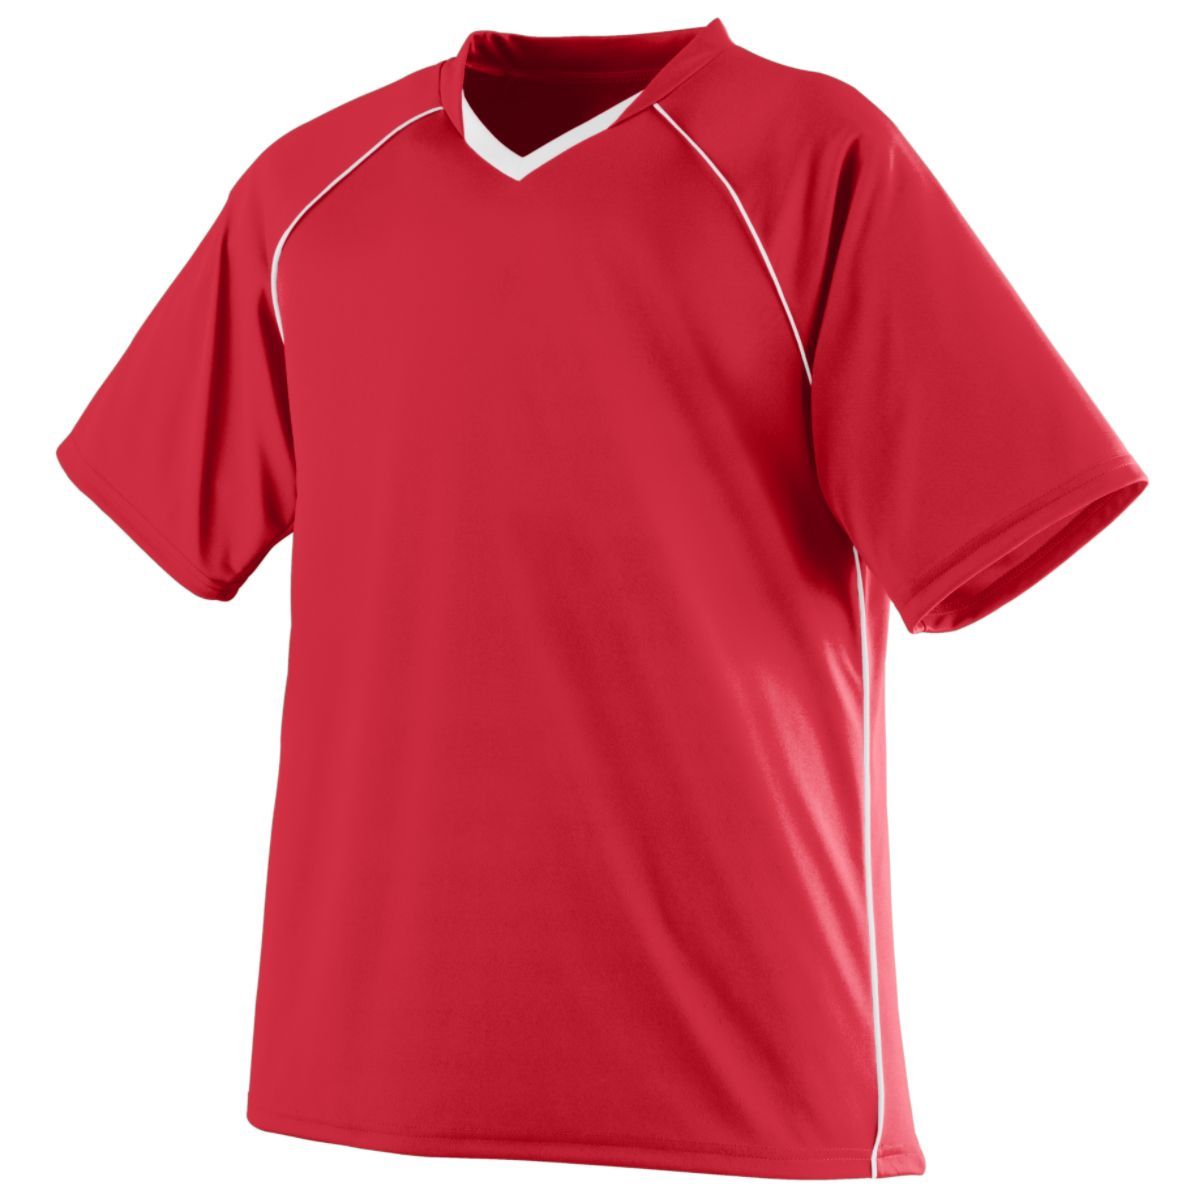 Augusta Sportswear Youth Striker Jersey in Red/White  -Part of the Youth, Youth-Jersey, Augusta-Products, Soccer, Shirts, All-Sports-1 product lines at KanaleyCreations.com